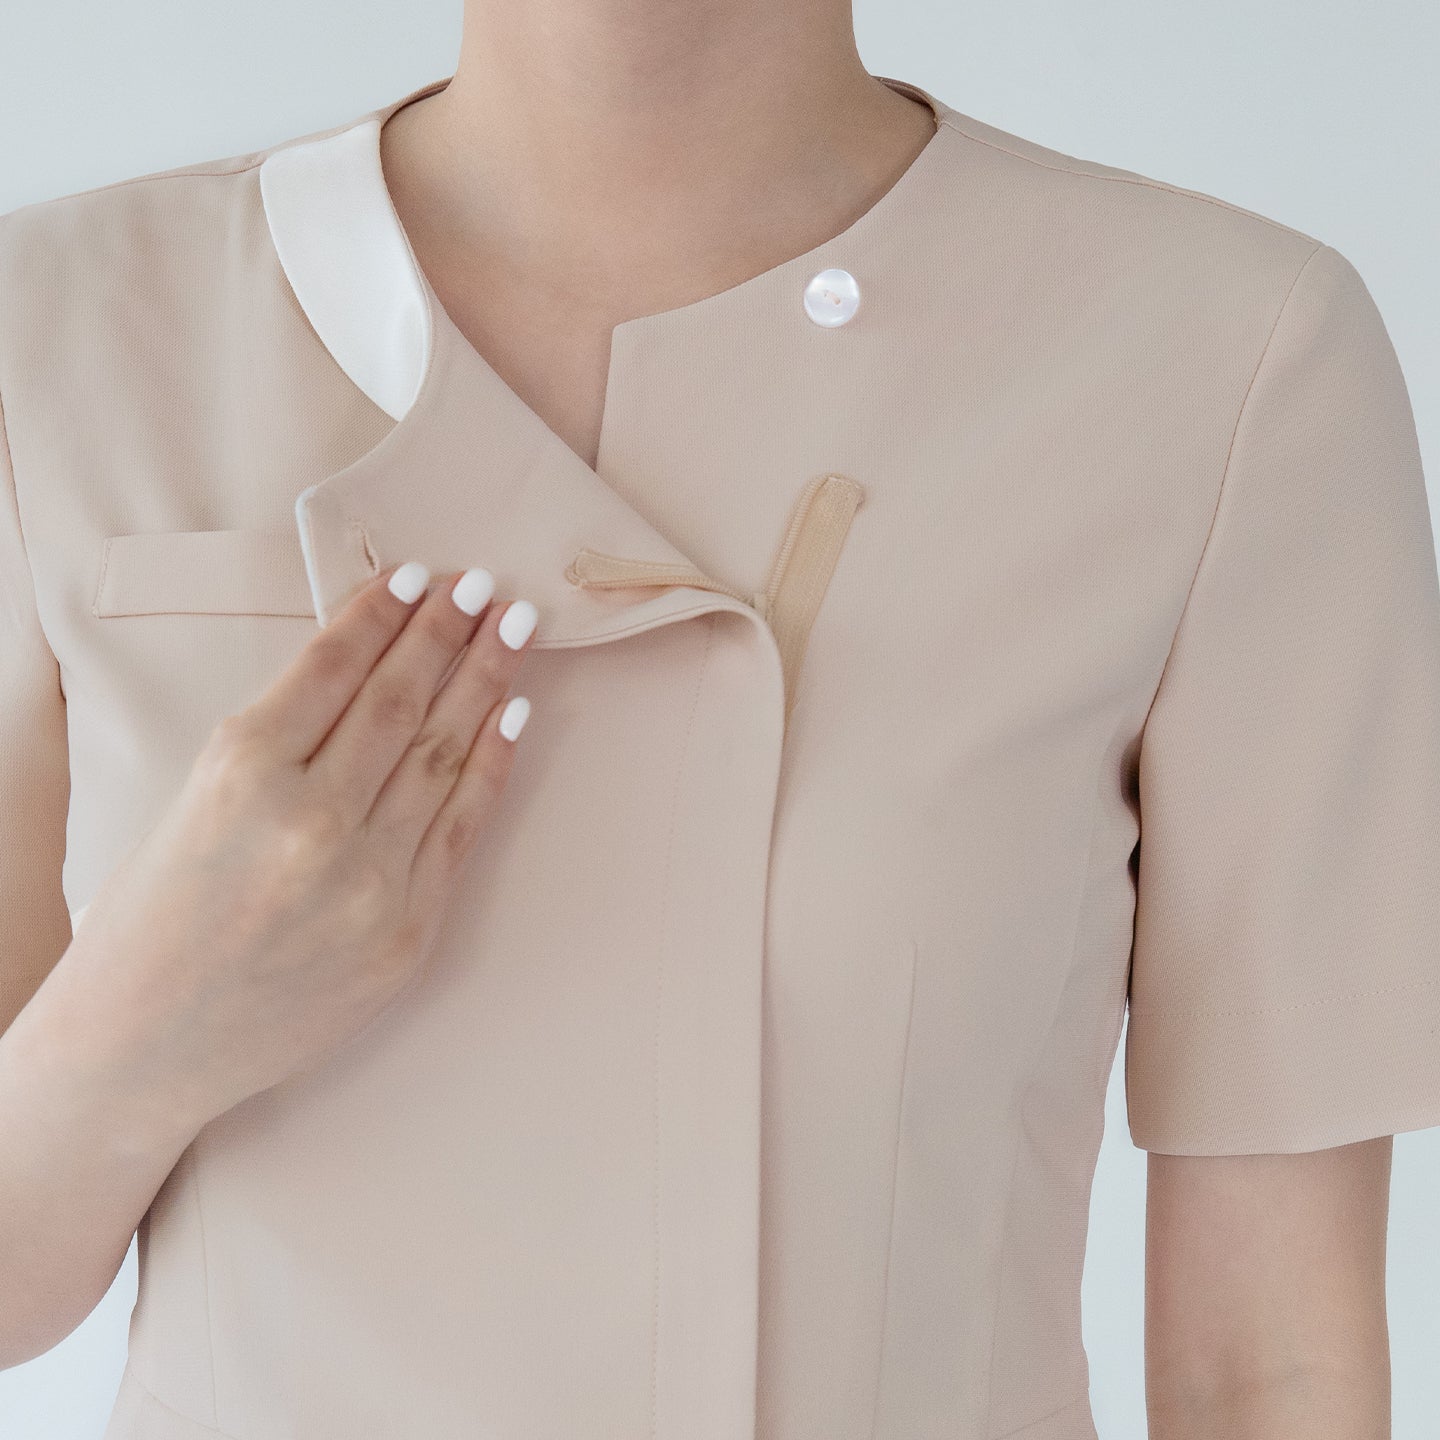 A close-up of a beige round-neck top with a front zipper and button detail, showing a hand opening the zipper to reveal the inner layer,Beige